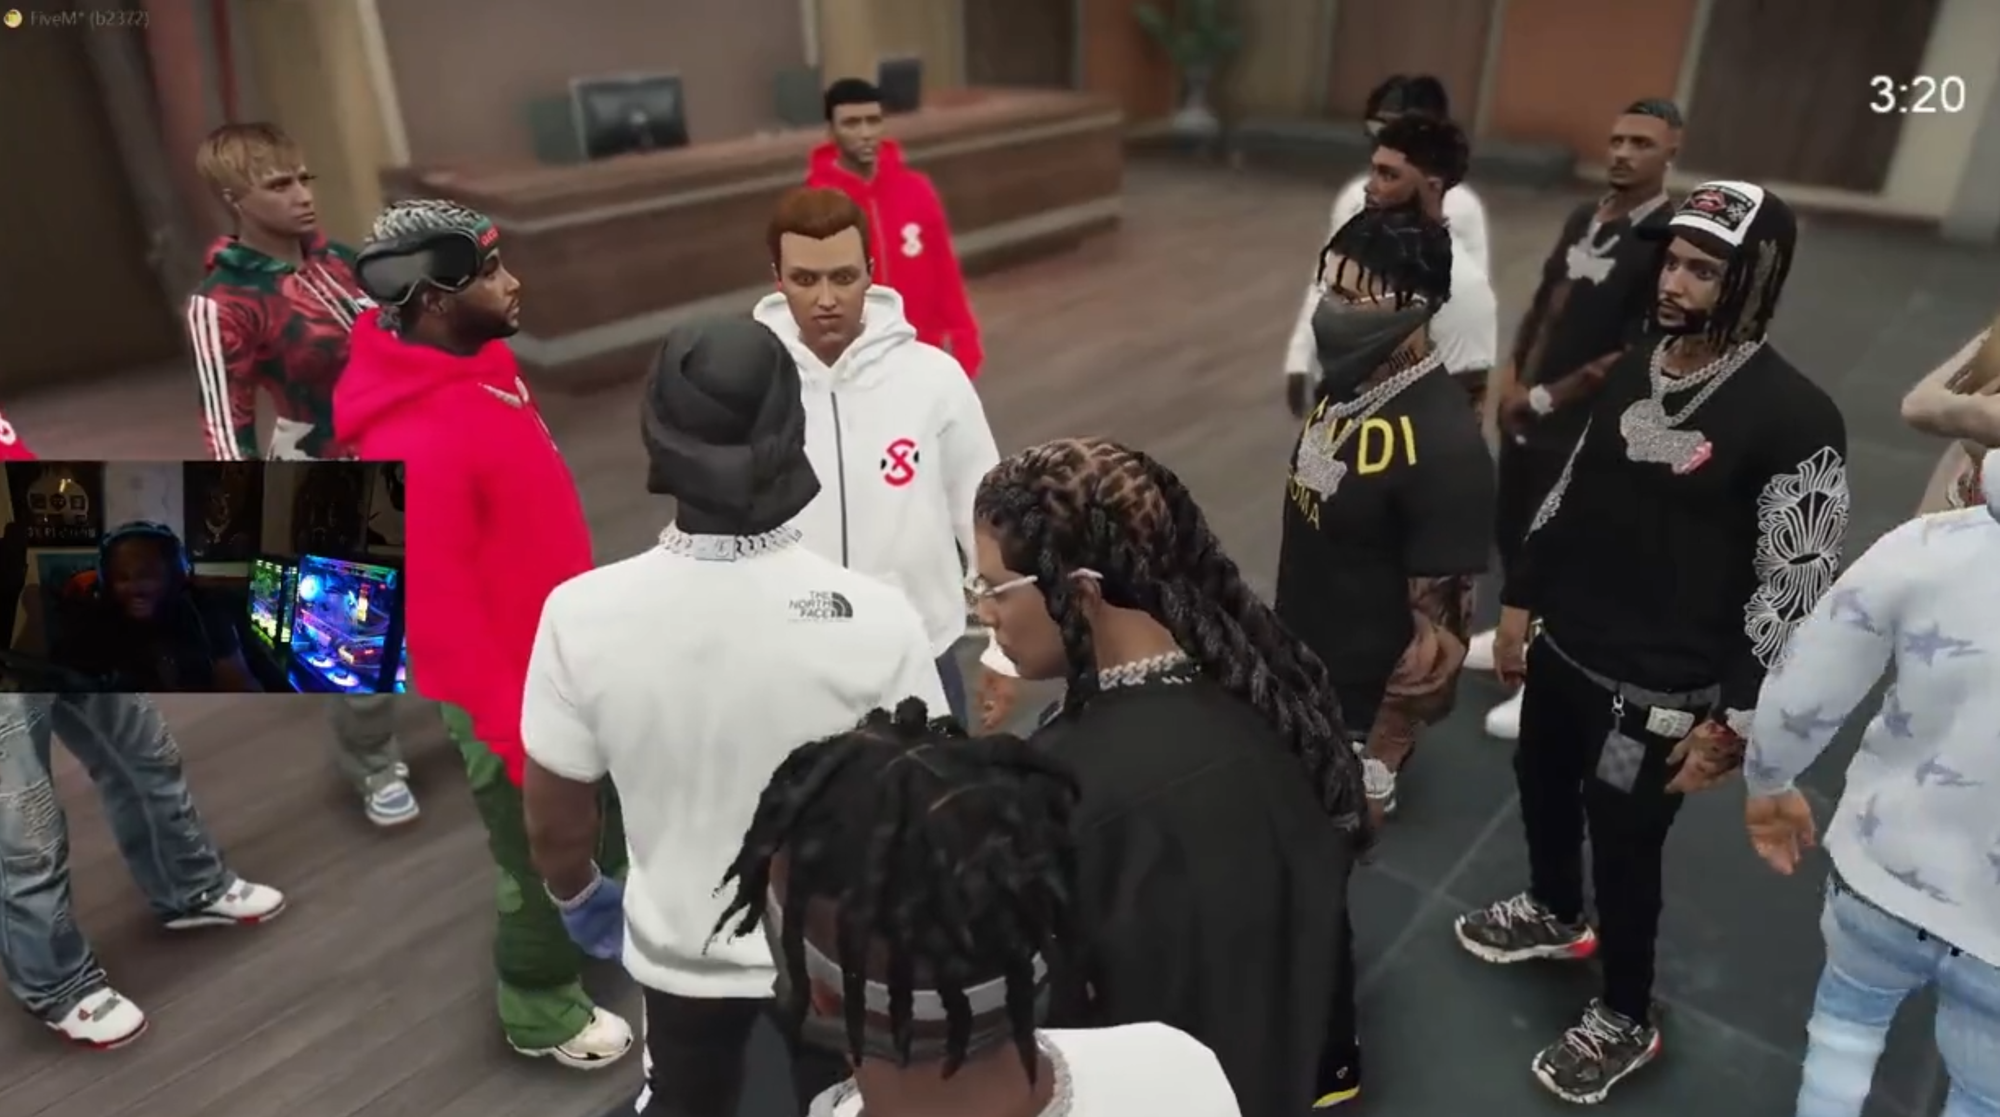 How To Play Gta With Tee Grizzley?